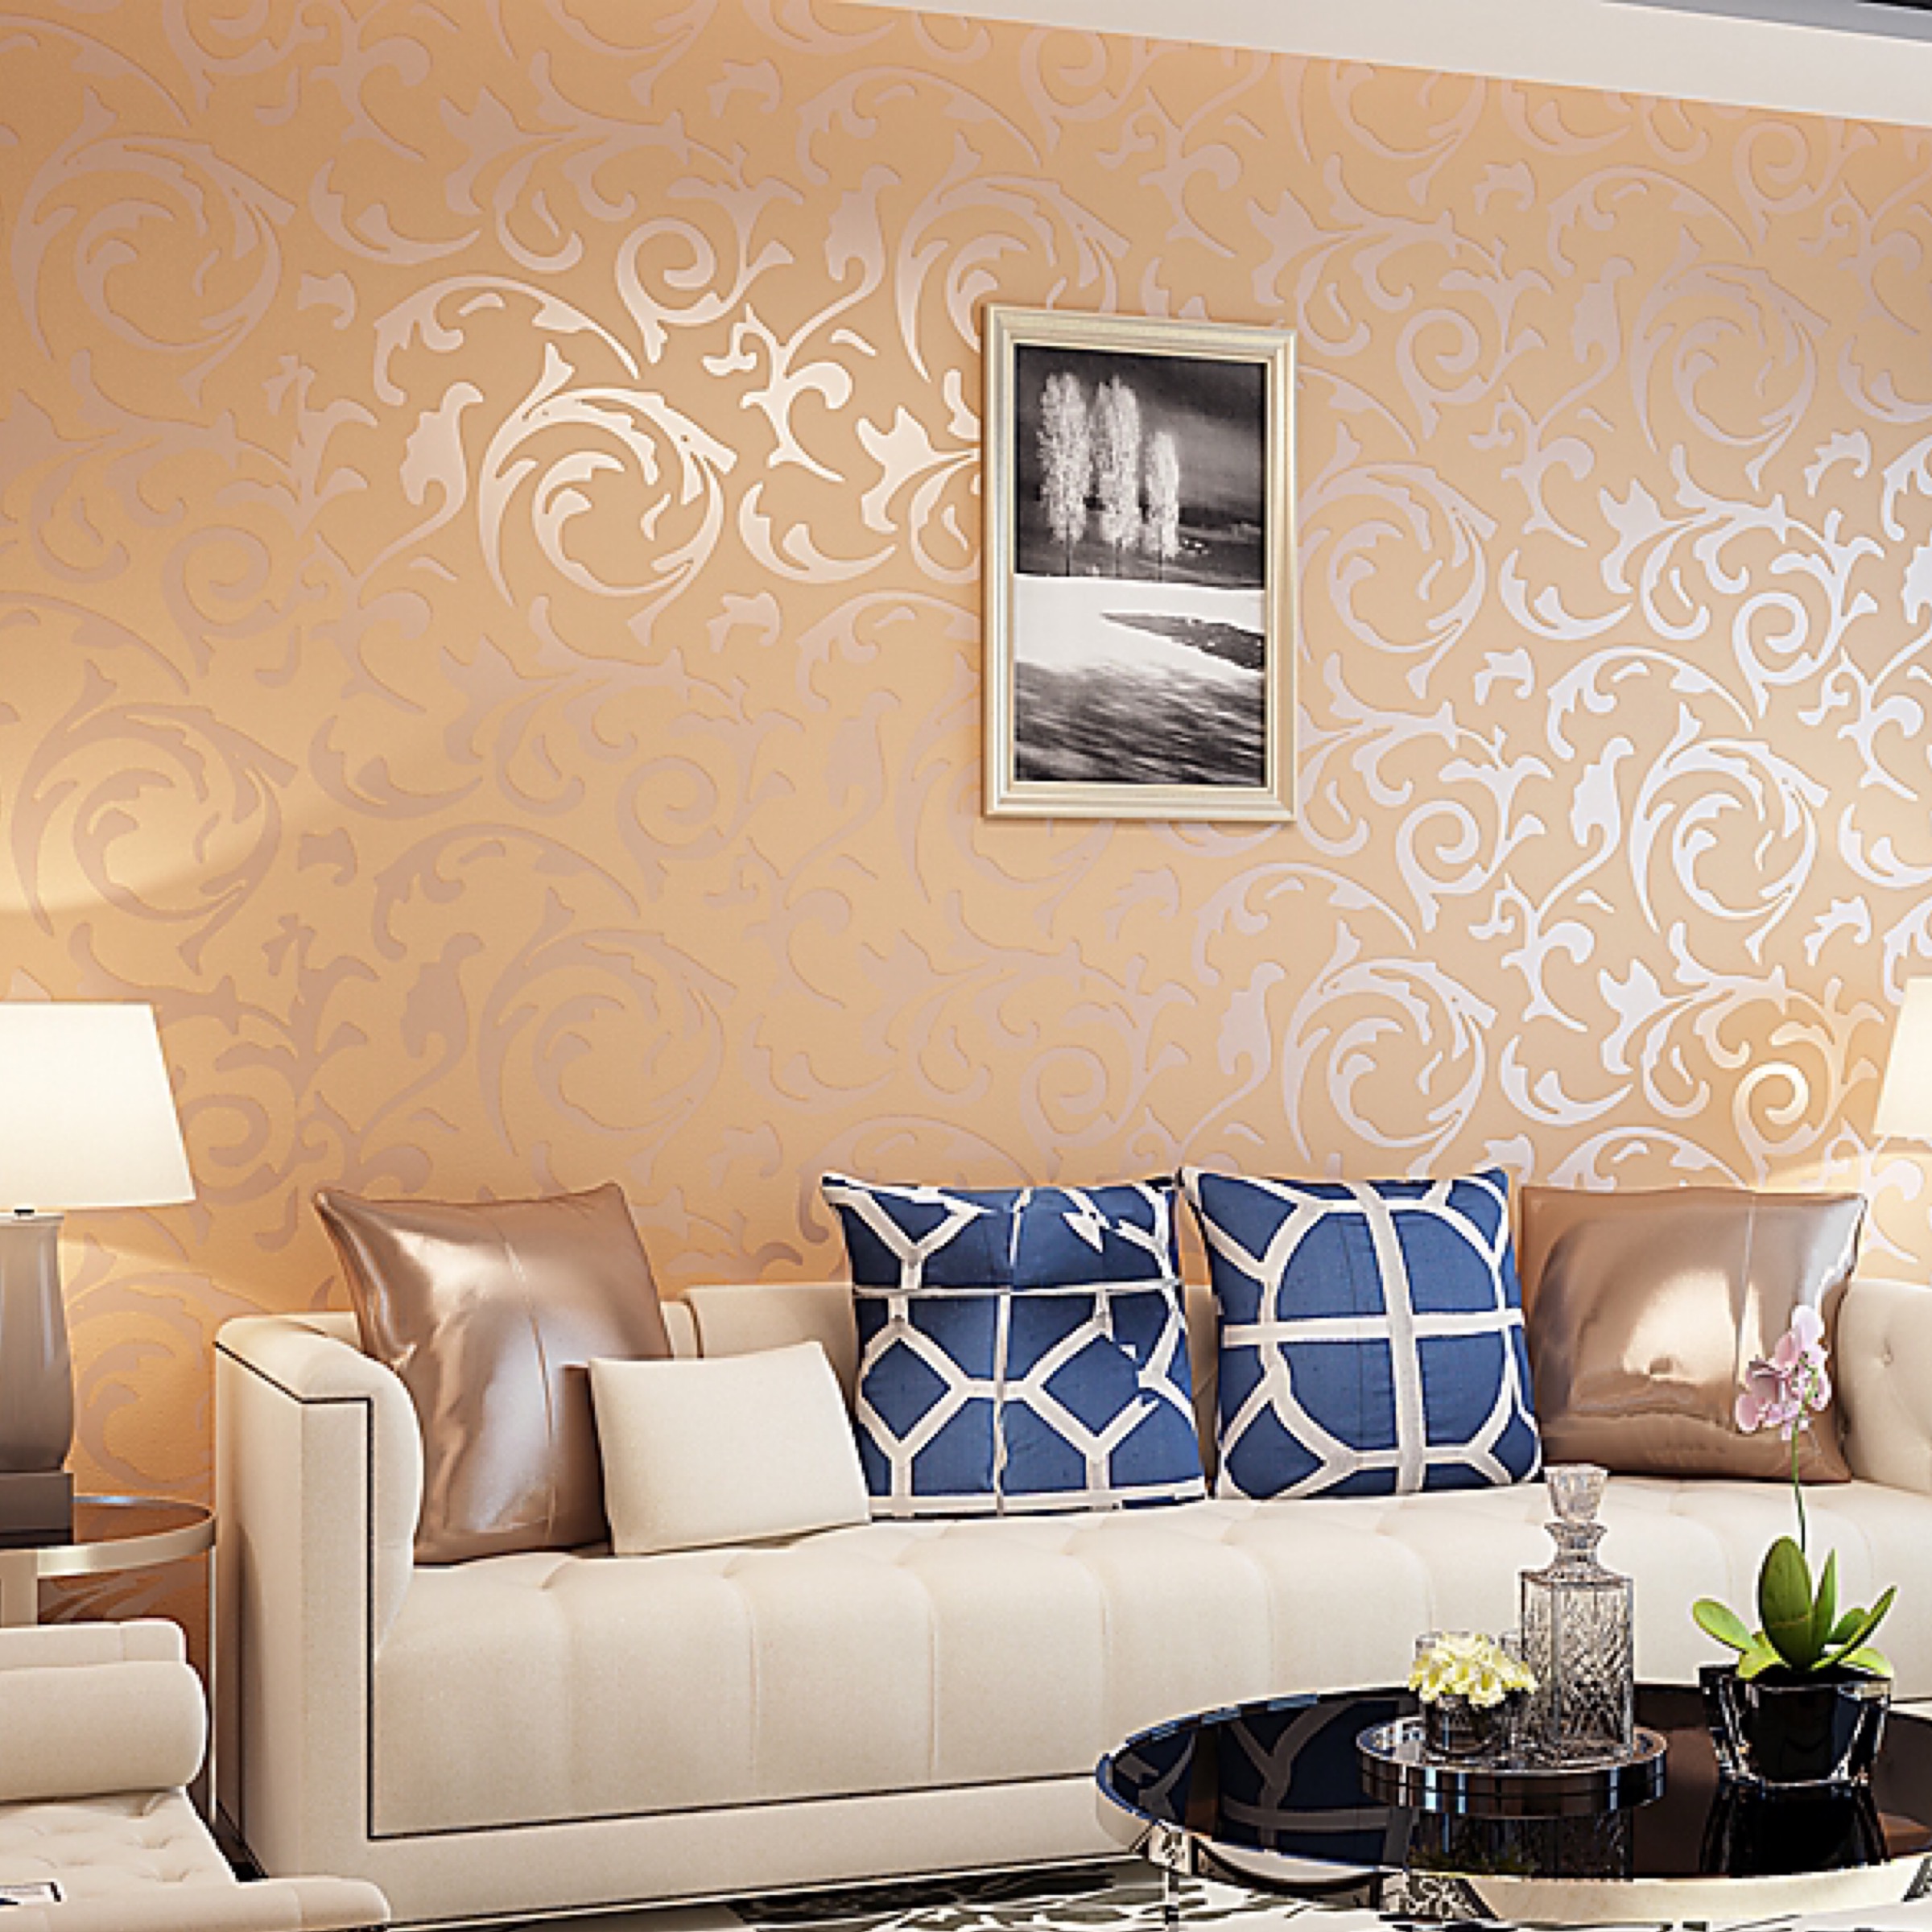 Wall Paper Designs In Nigeria , HD Wallpaper & Backgrounds